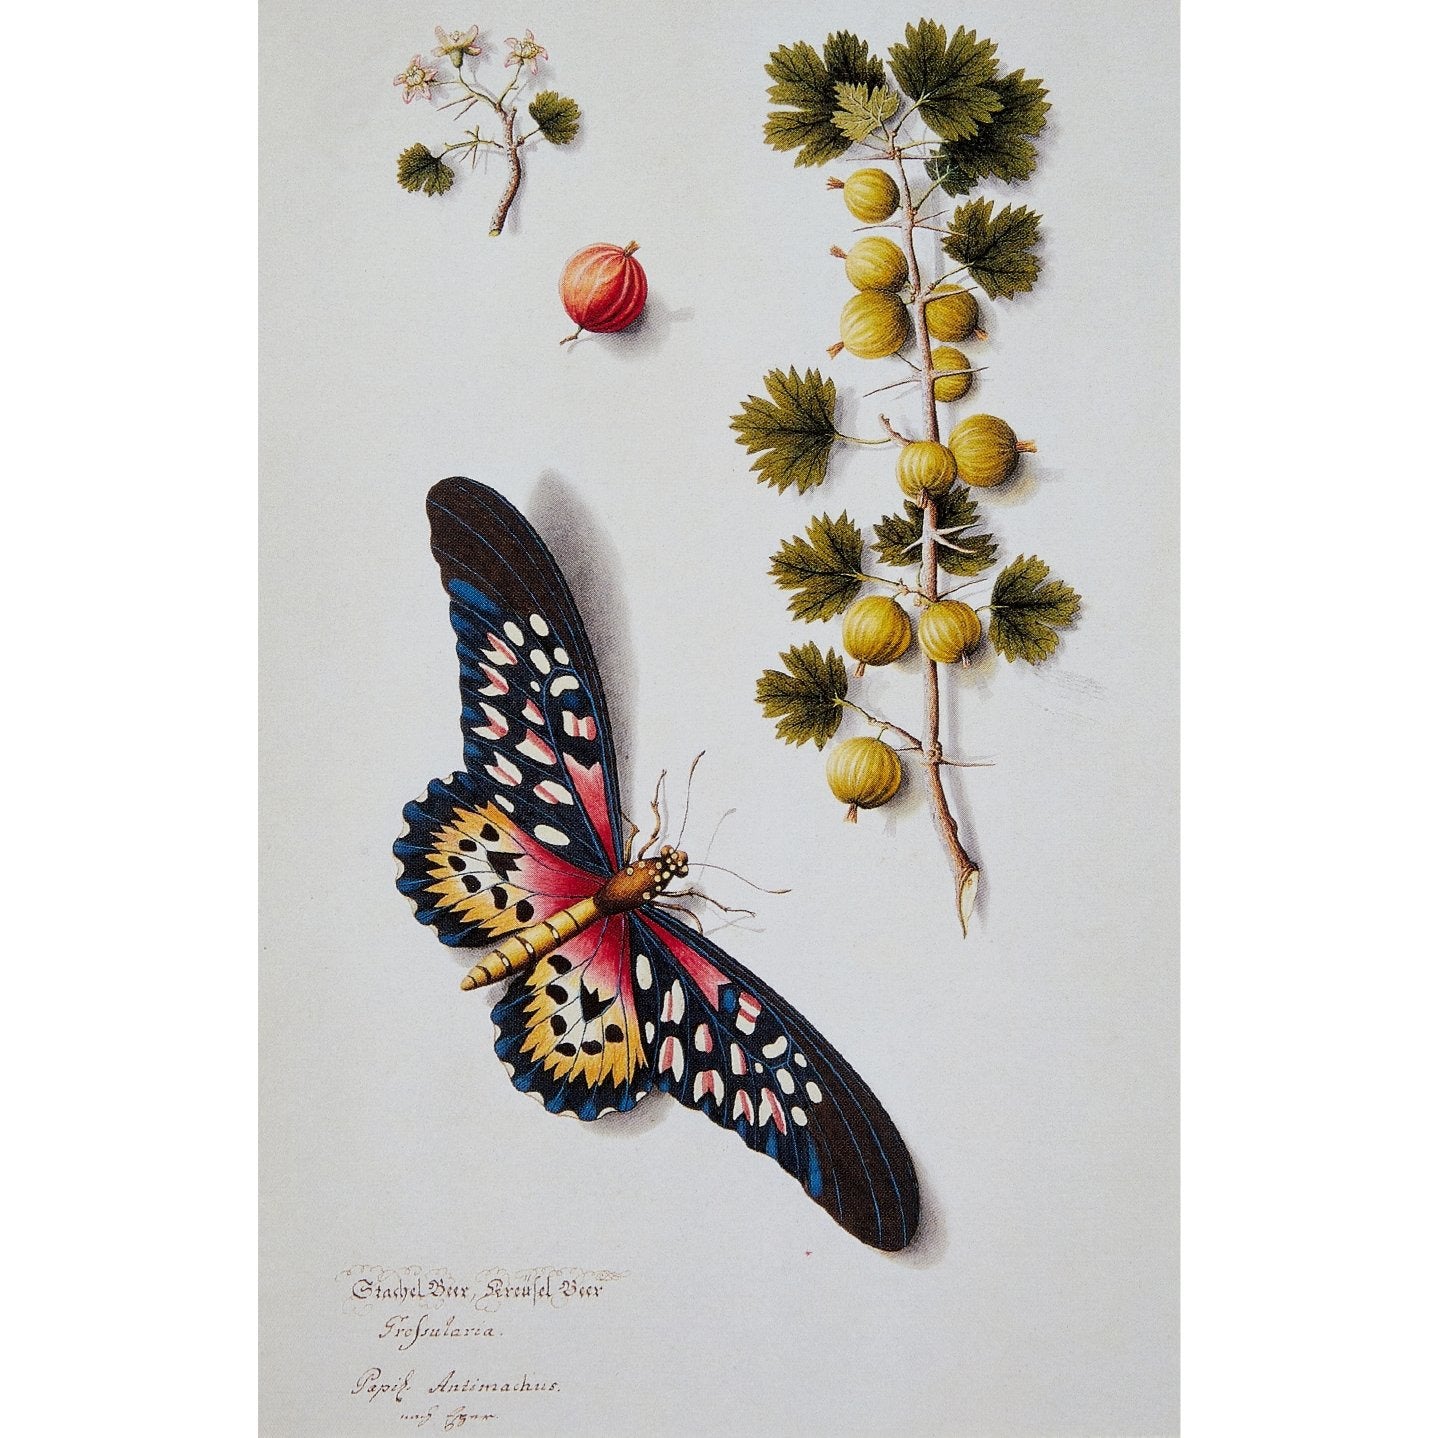 Notecard image - Joseph Jakob von Plenck, Gooseberry and African Giant Swallowtail butterfly. From the Broughton collection in the Fitzwilliam Museum, brought to you by CuratingCambridge.co.uk